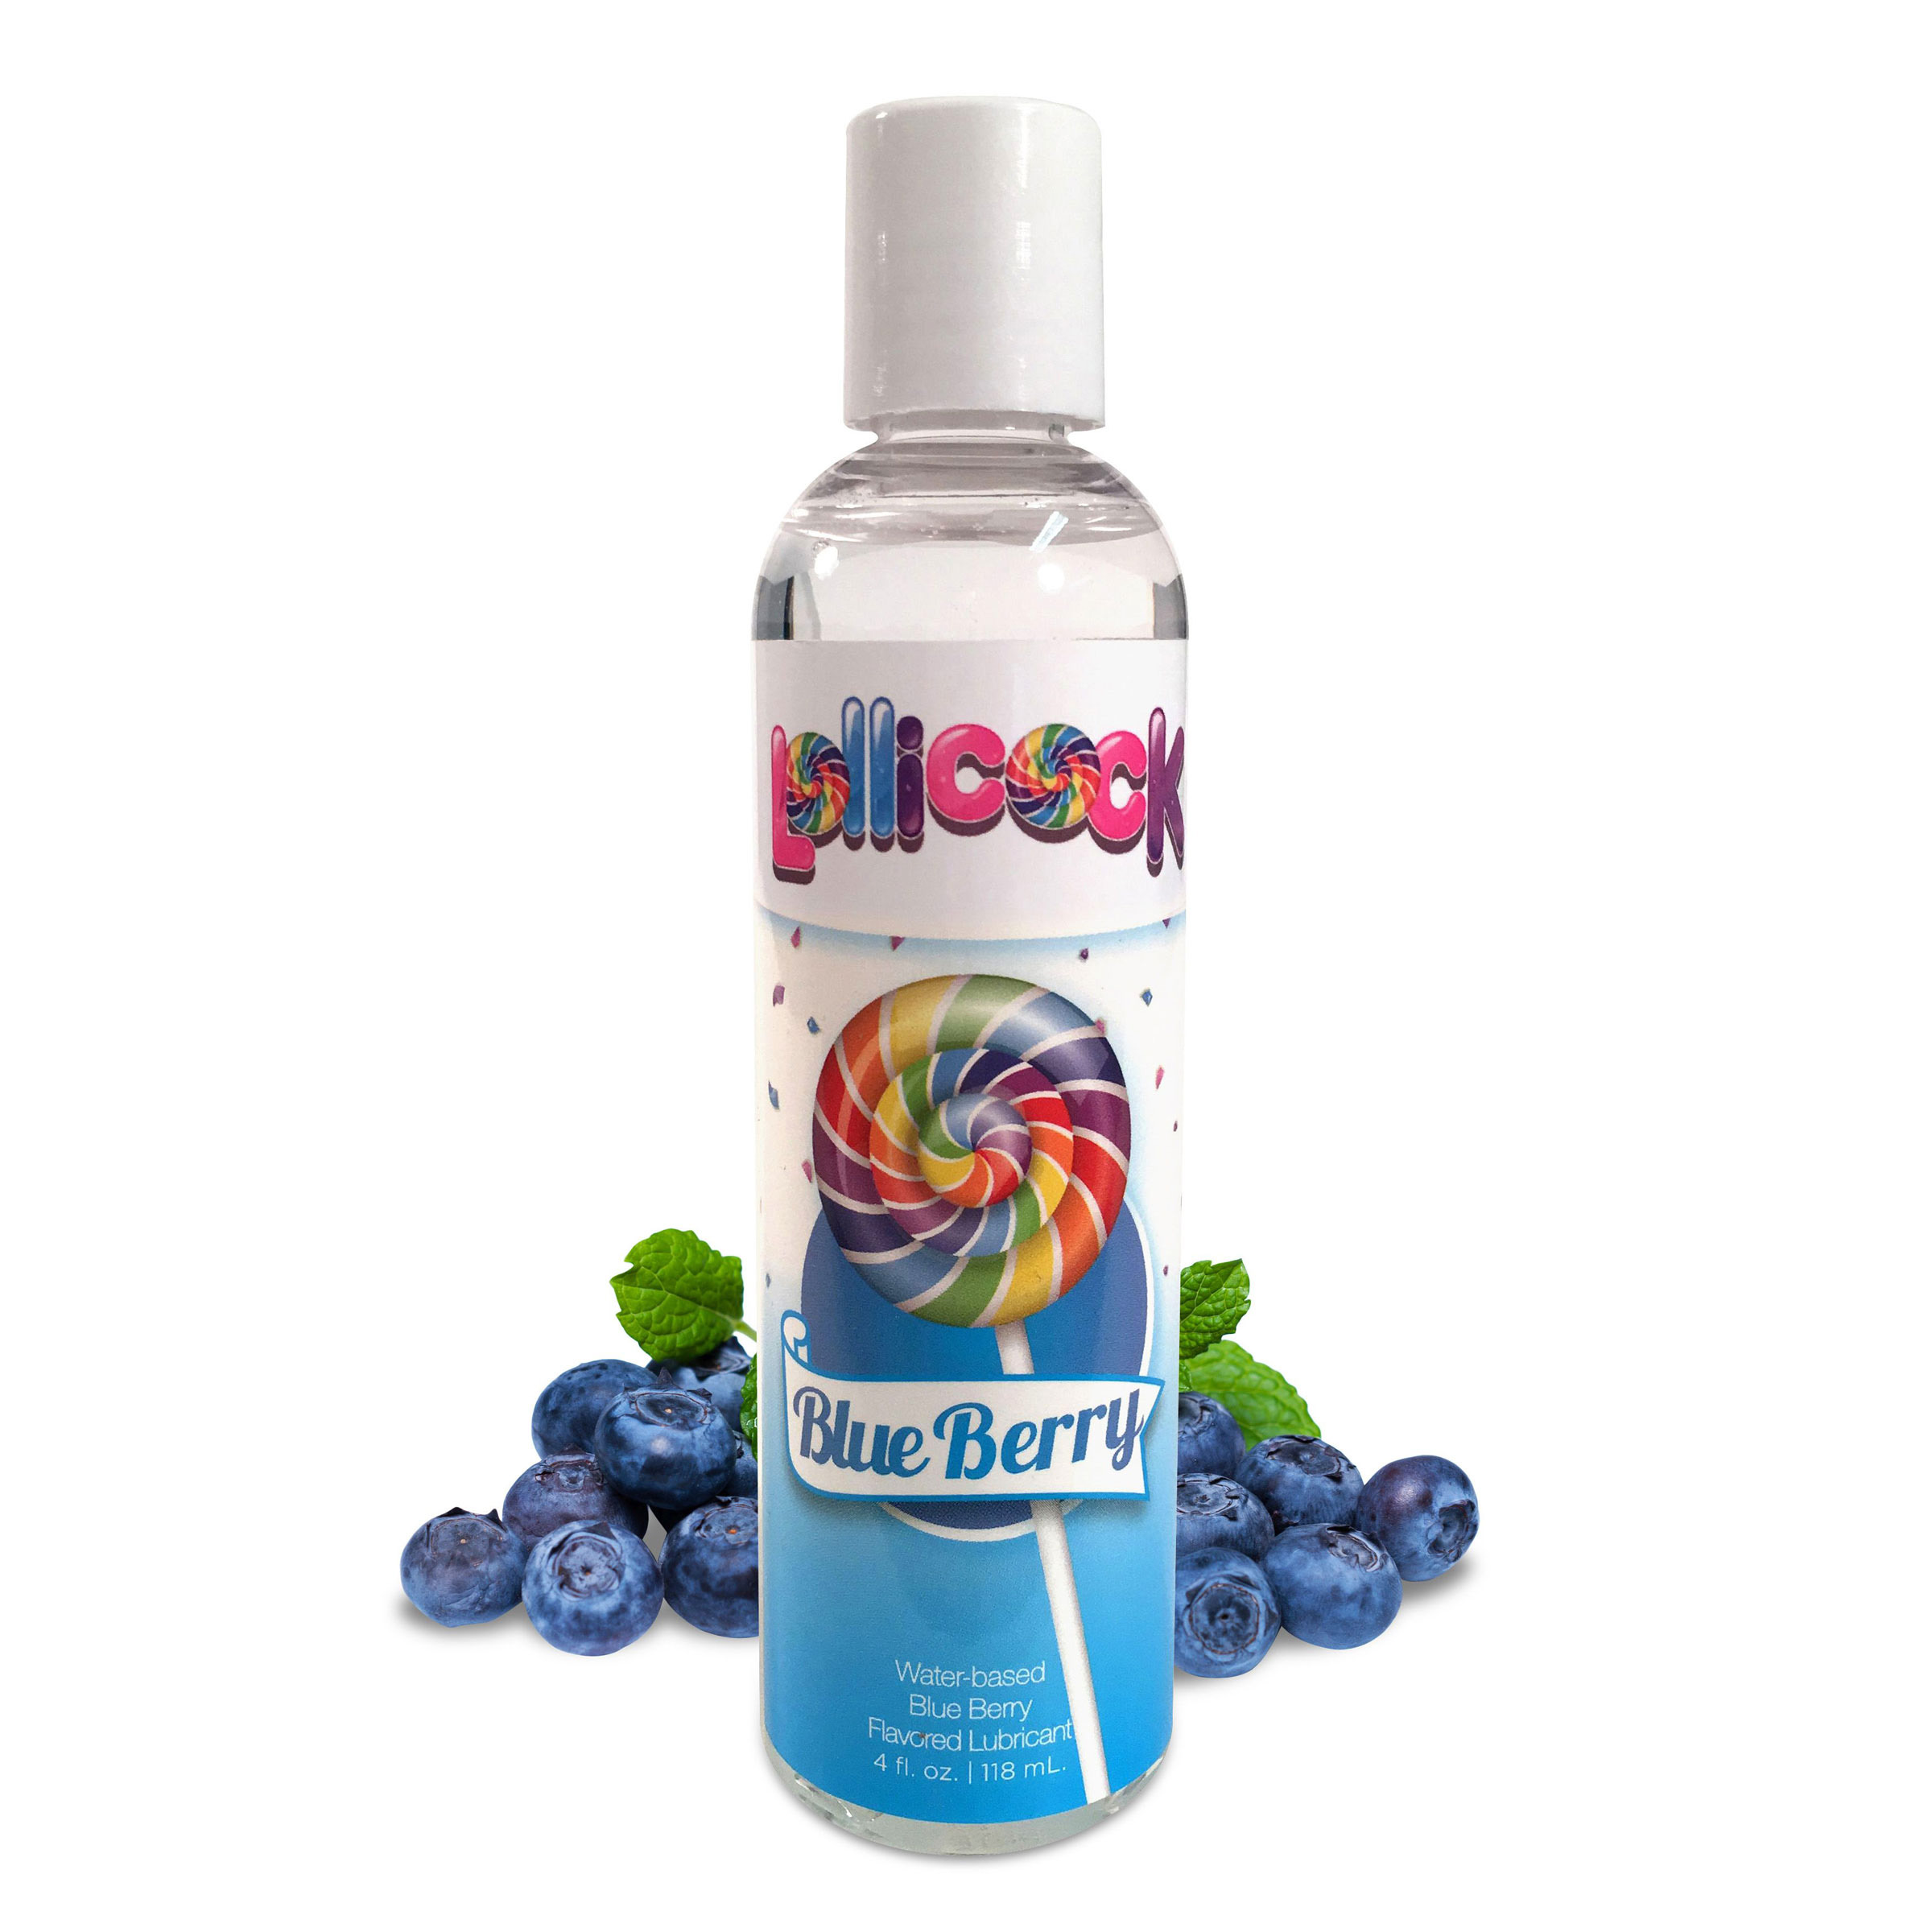 Lollicock 4 oz. Water-based Flavored Lubricant – Blue Berry